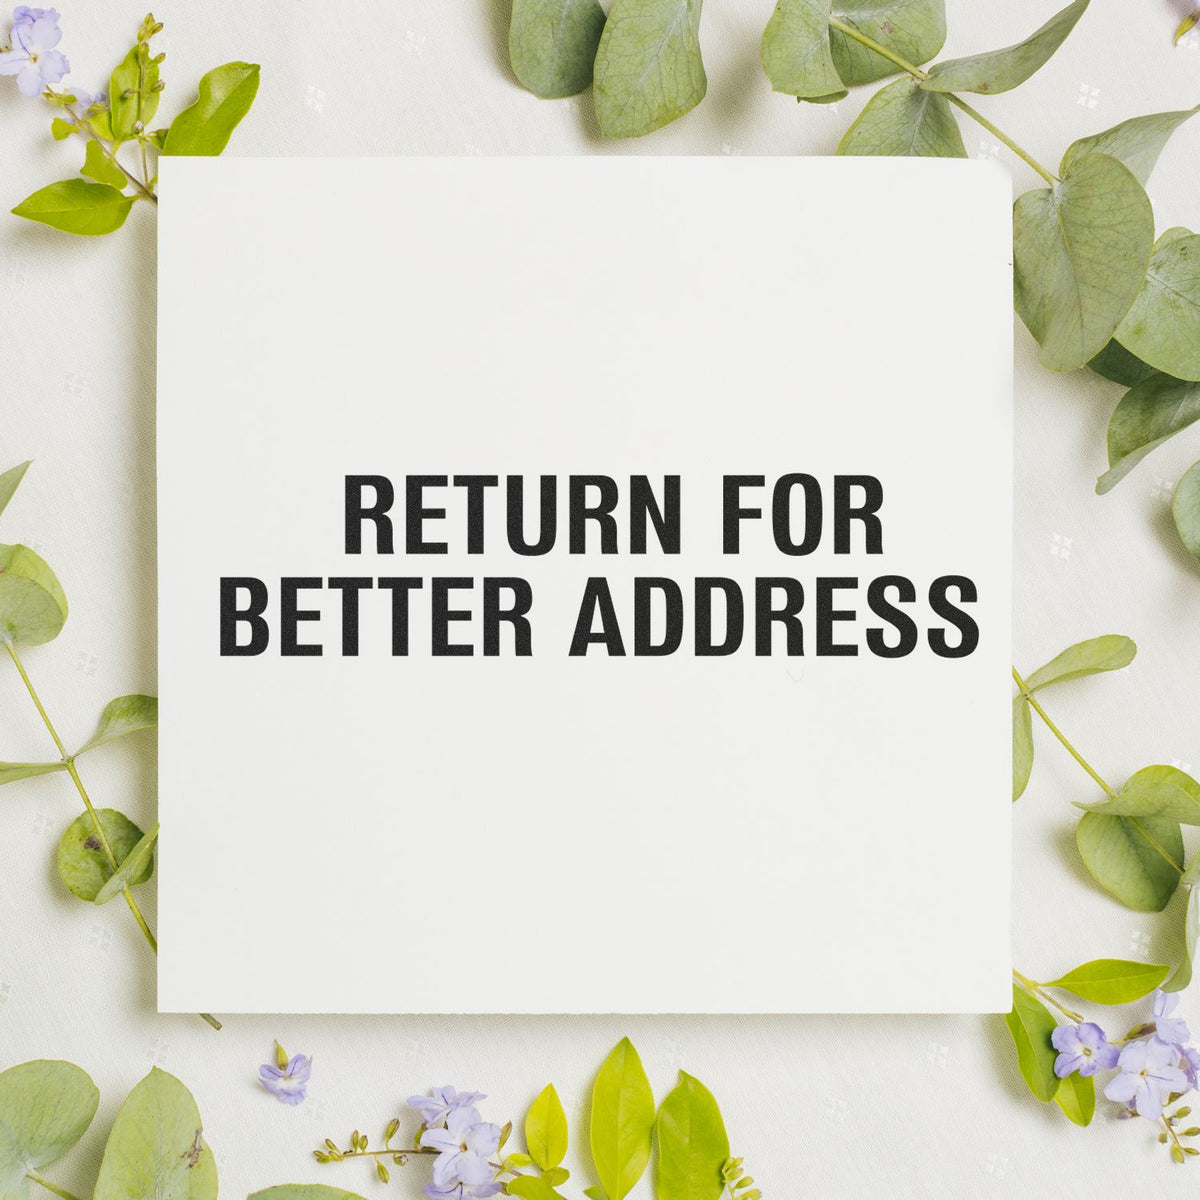 Return for Better Address Rubber Stamp Lifestyle Photo